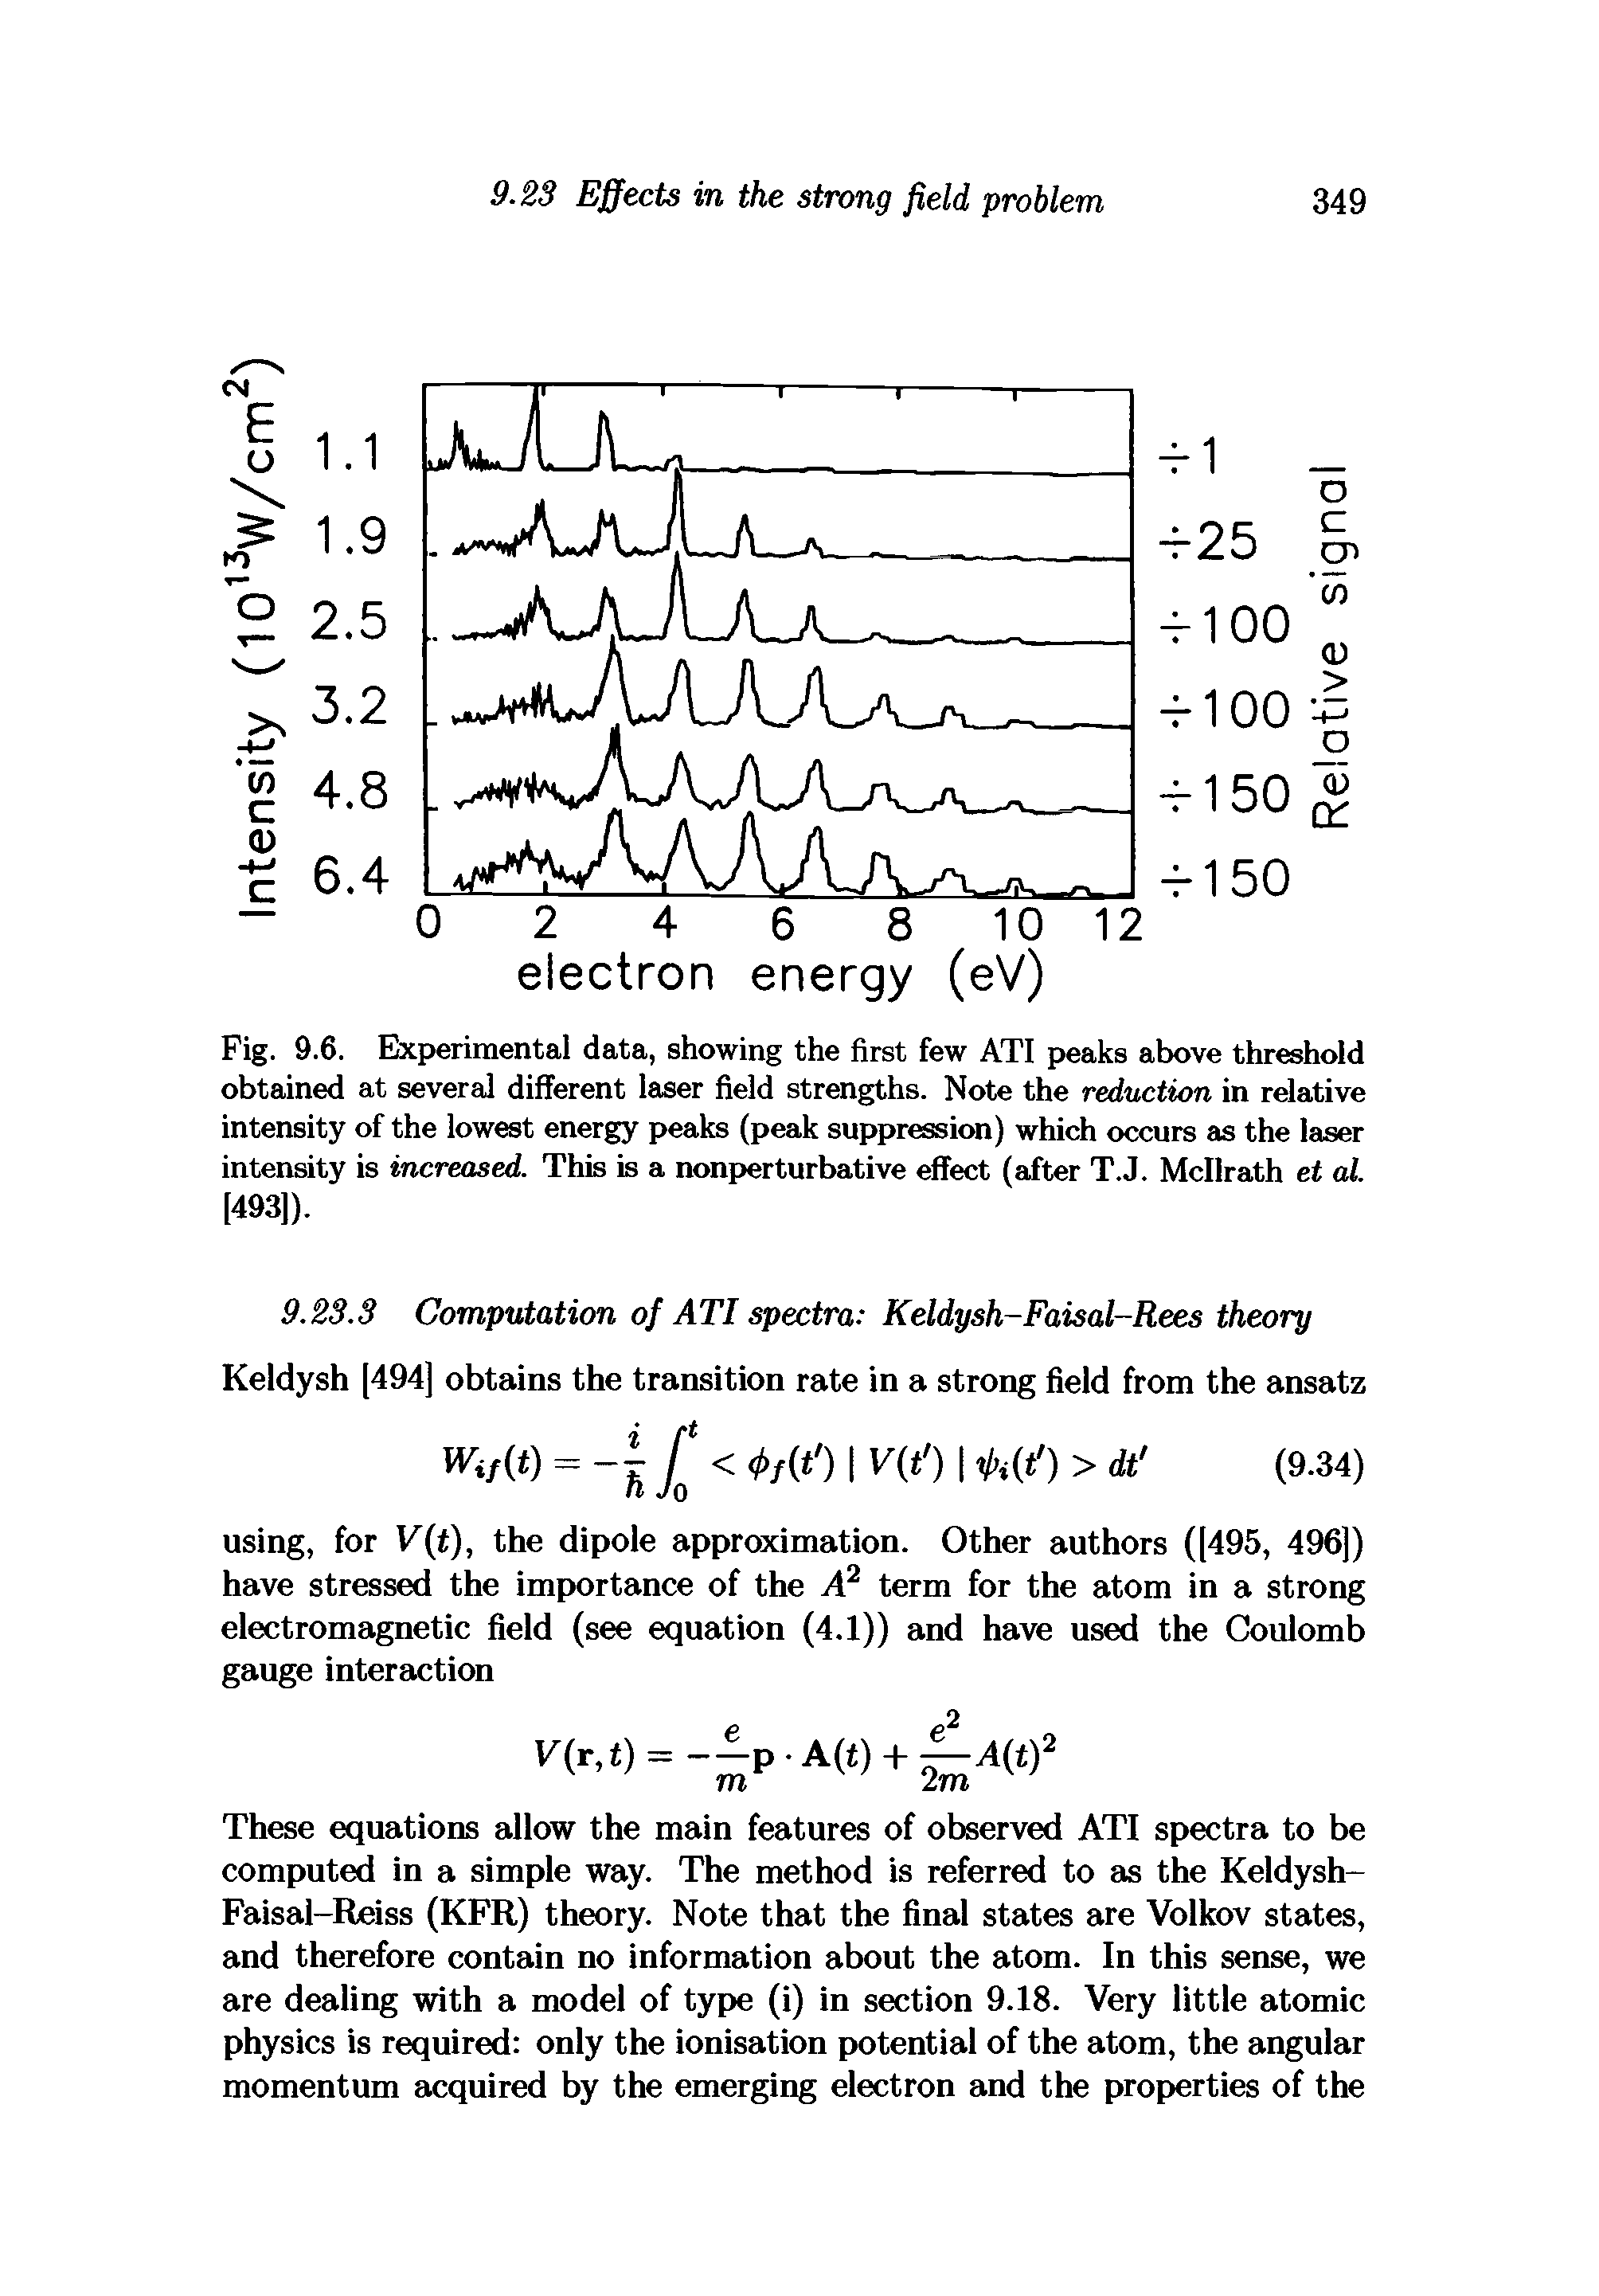 Fig. 9.6. Experimental data, showing the first few ATI peaks above threshold obtained at several different laser field strengths. Note the reduction in relative intensity of the lowest energy peaks (peak suppression) which occurs as the laser intensity is increased. This is a nonperturbative effect (after T.J. Mcllrath et al. [493]).